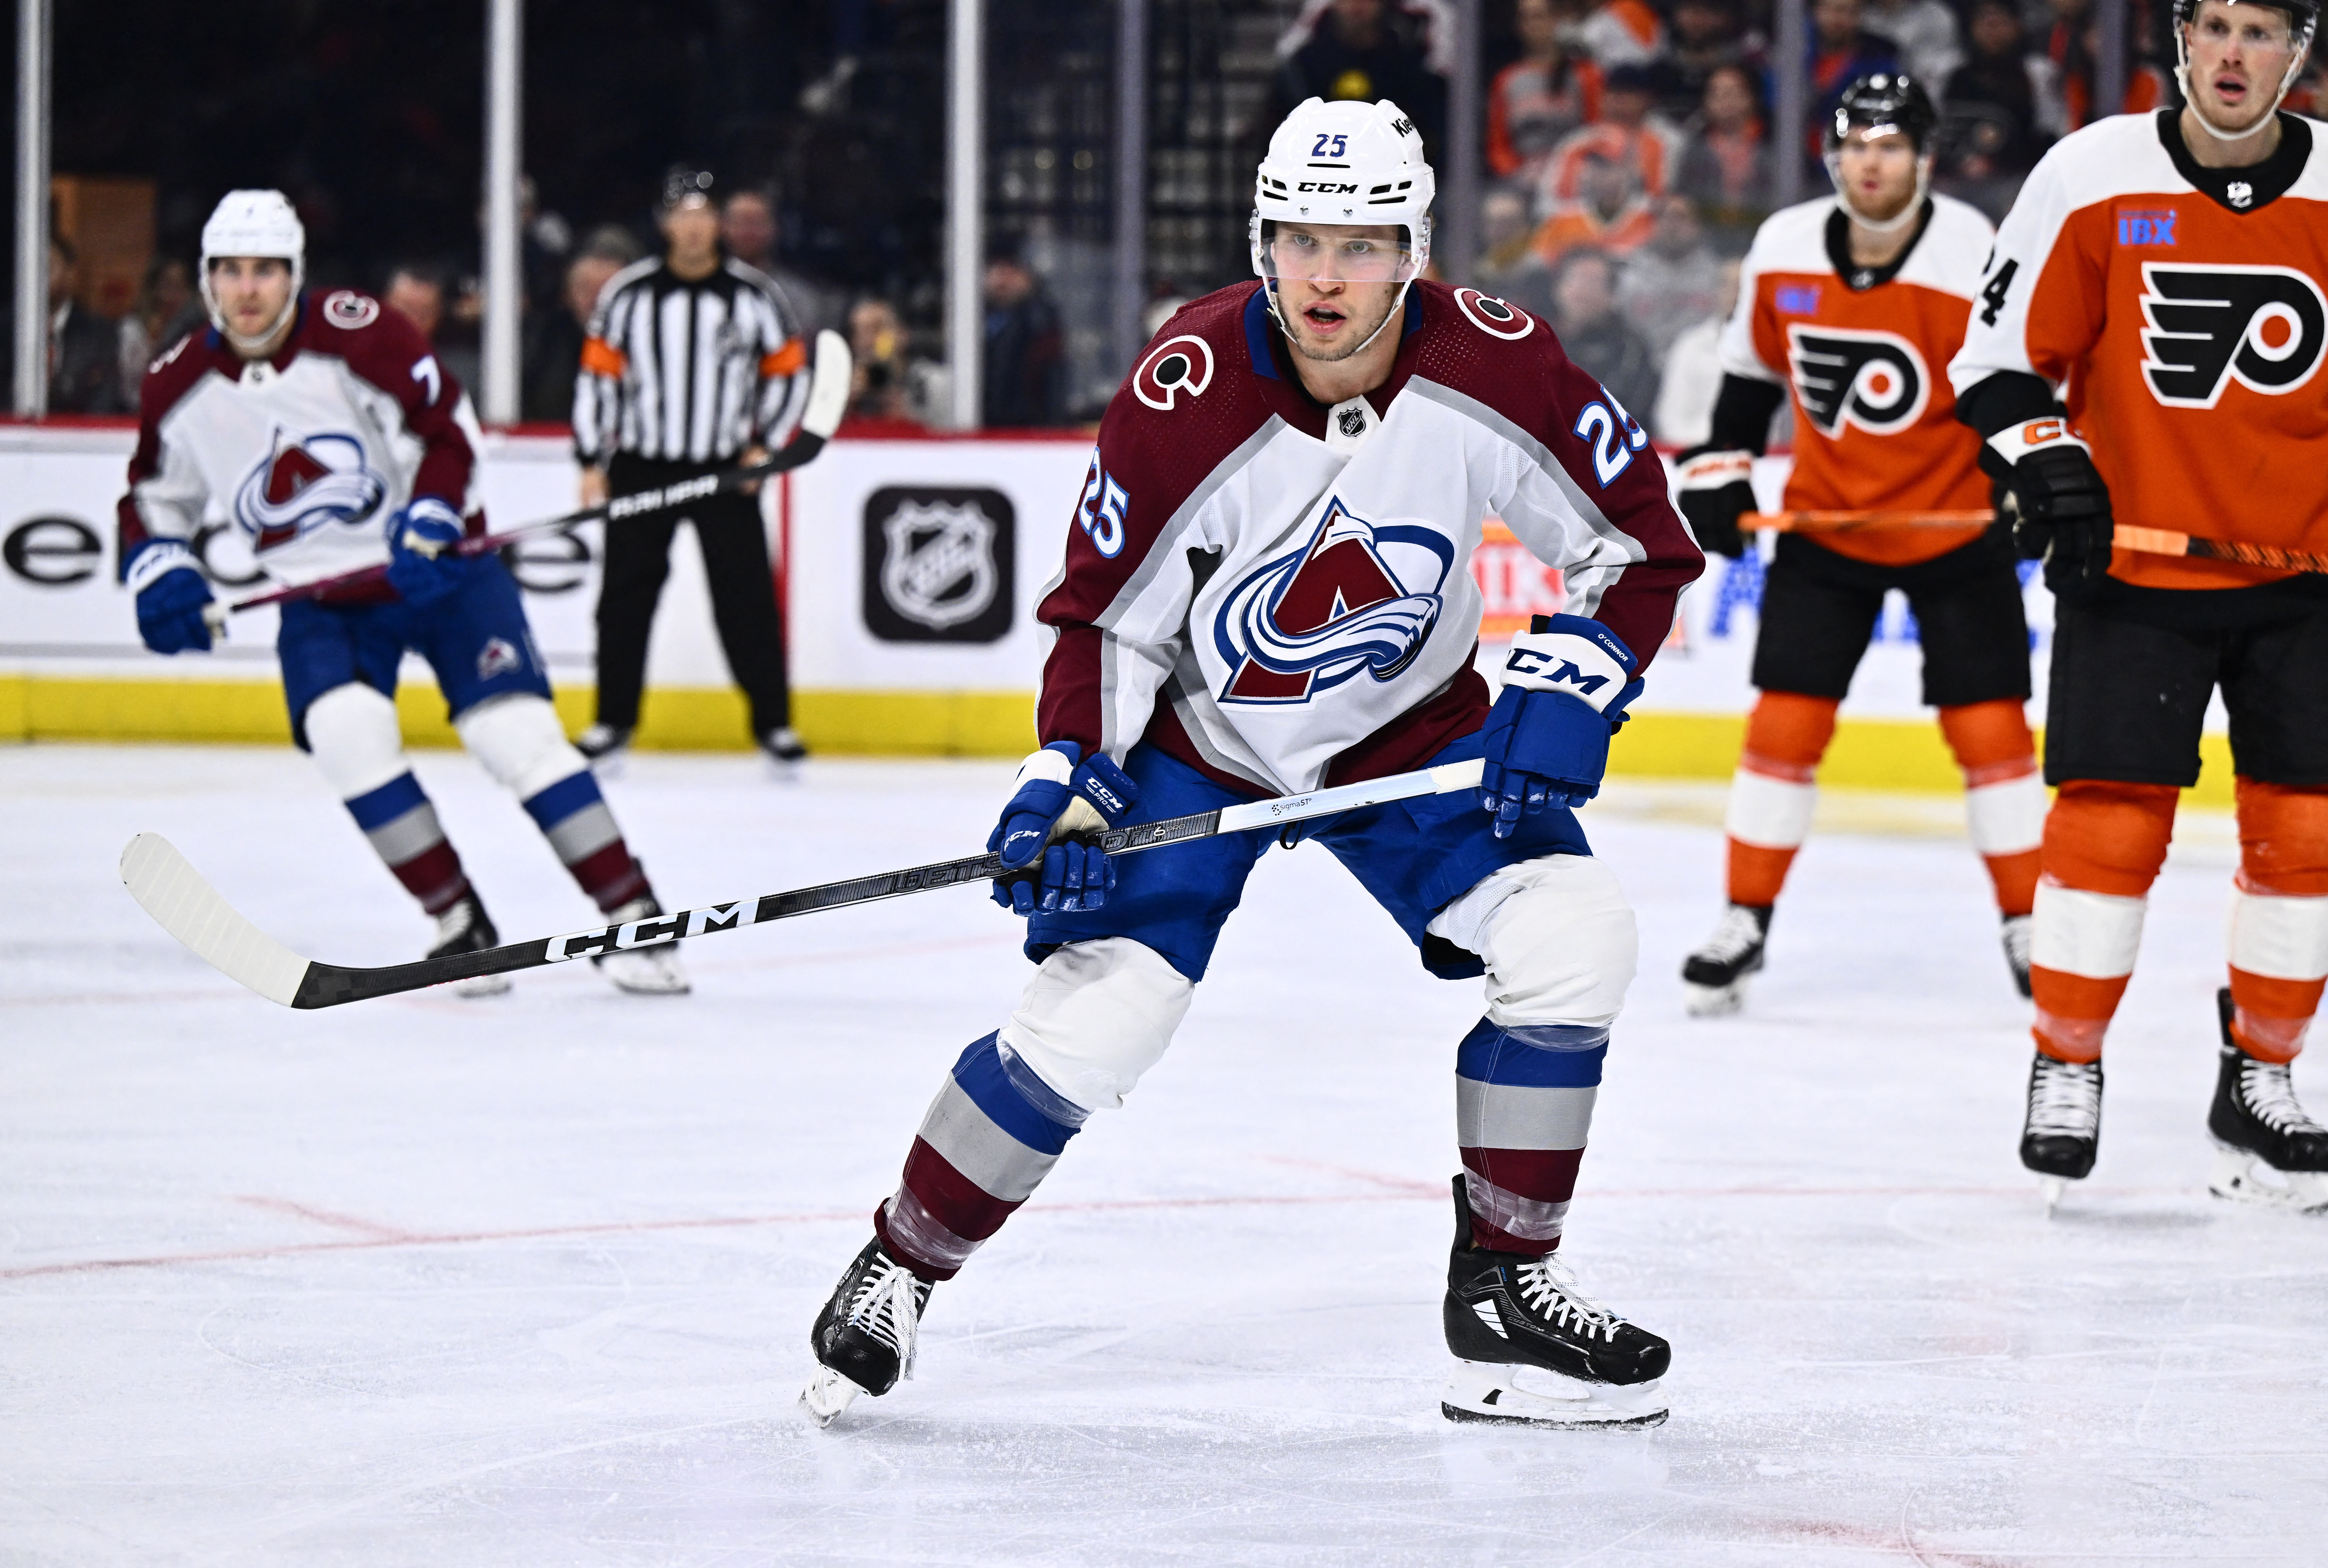 Logan O'Connor gets hat trick, Avalanche overpower Flyers